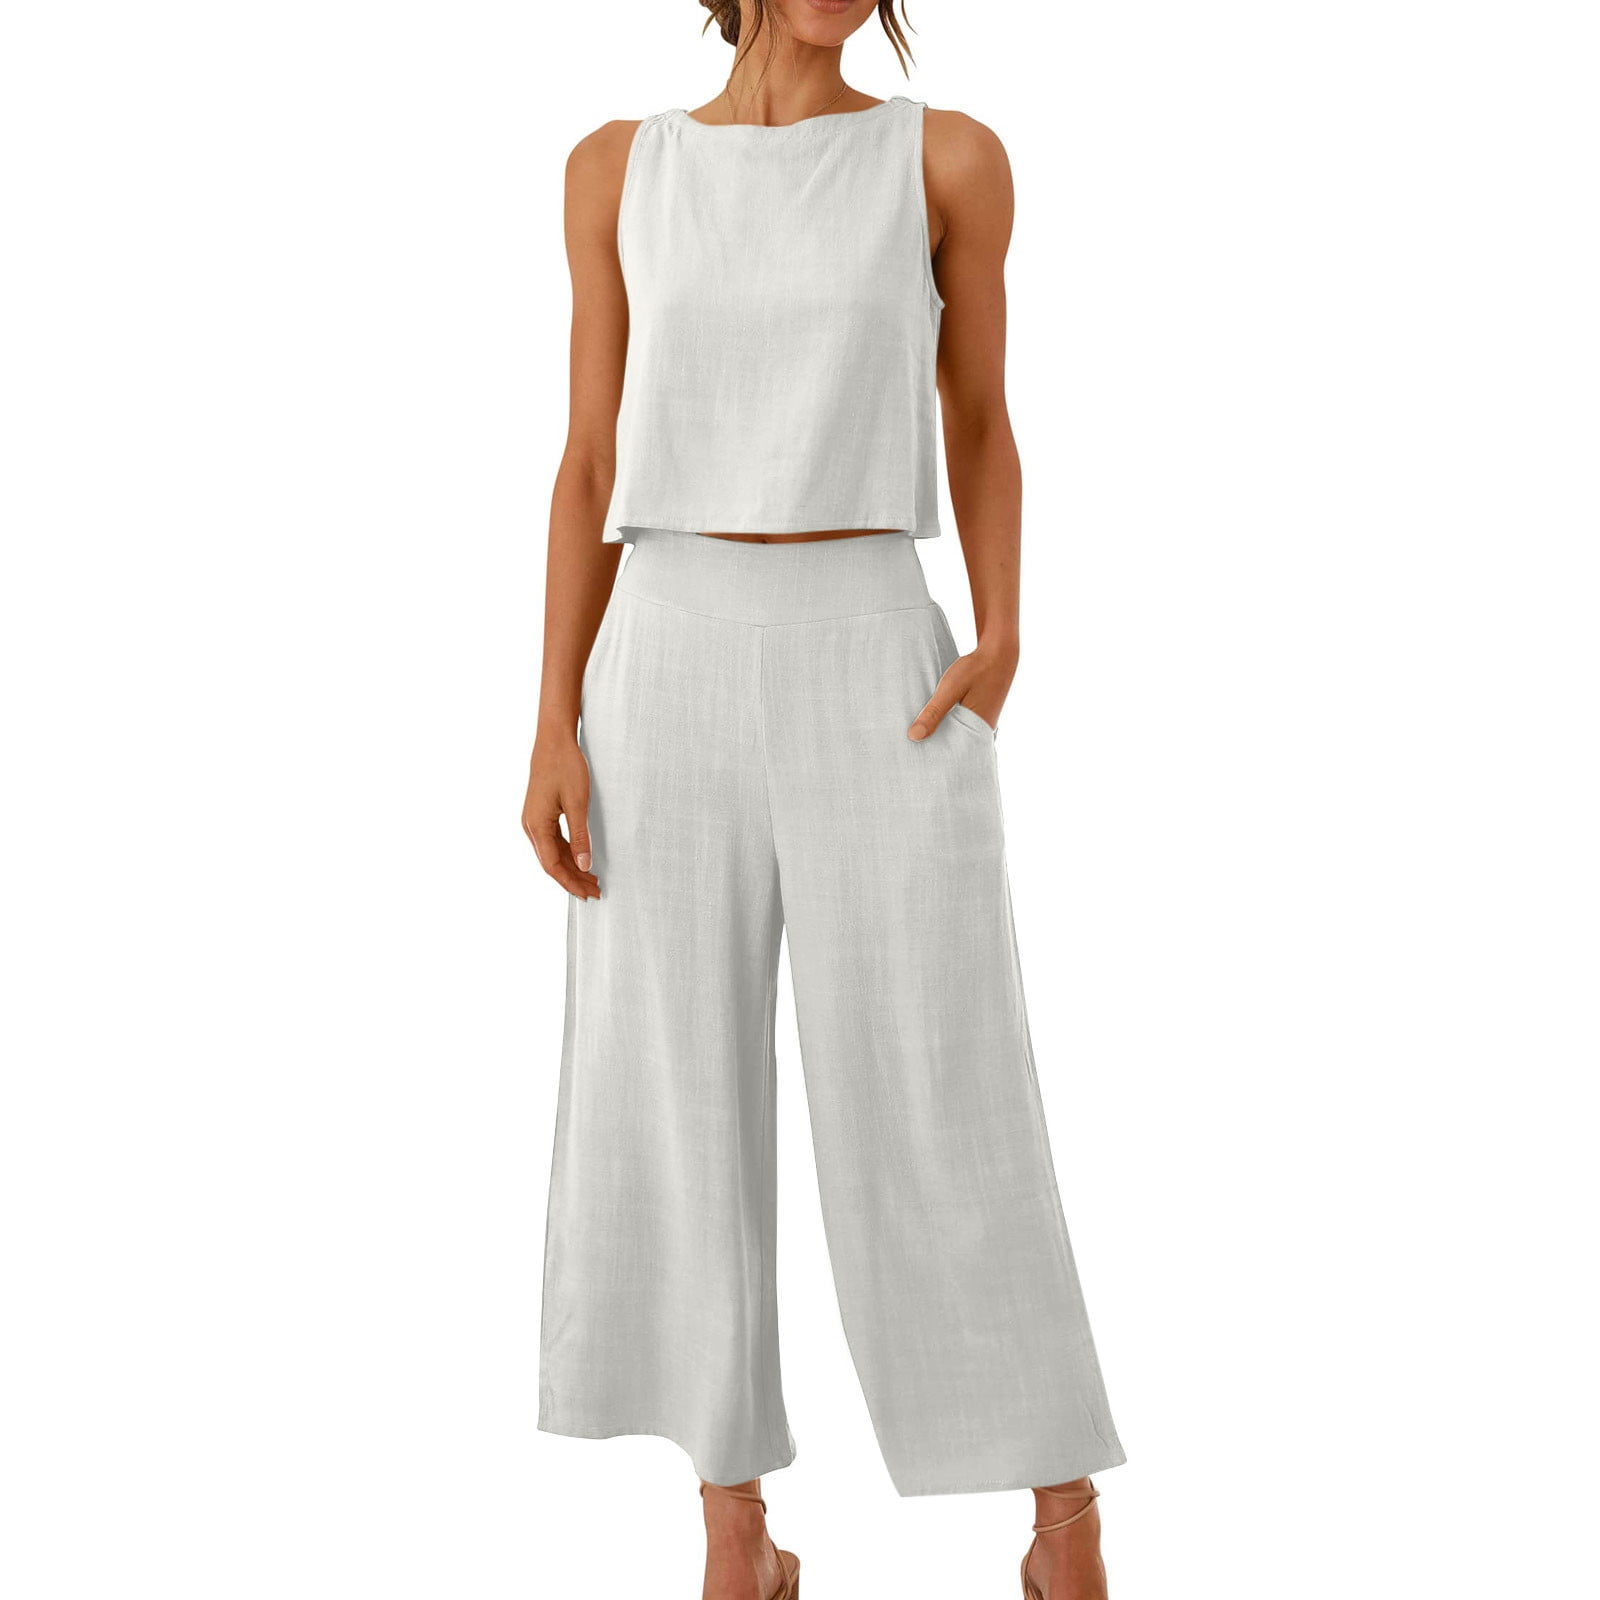 QUYUON Travel Outfits for Women 2PC Womens Two Piece Outfits Pants Sets  Summer Round Neck Sleeveless Crop Tank Tops and Elastic Waist Cropped Wide  Leg Pants Sets with Pockets 